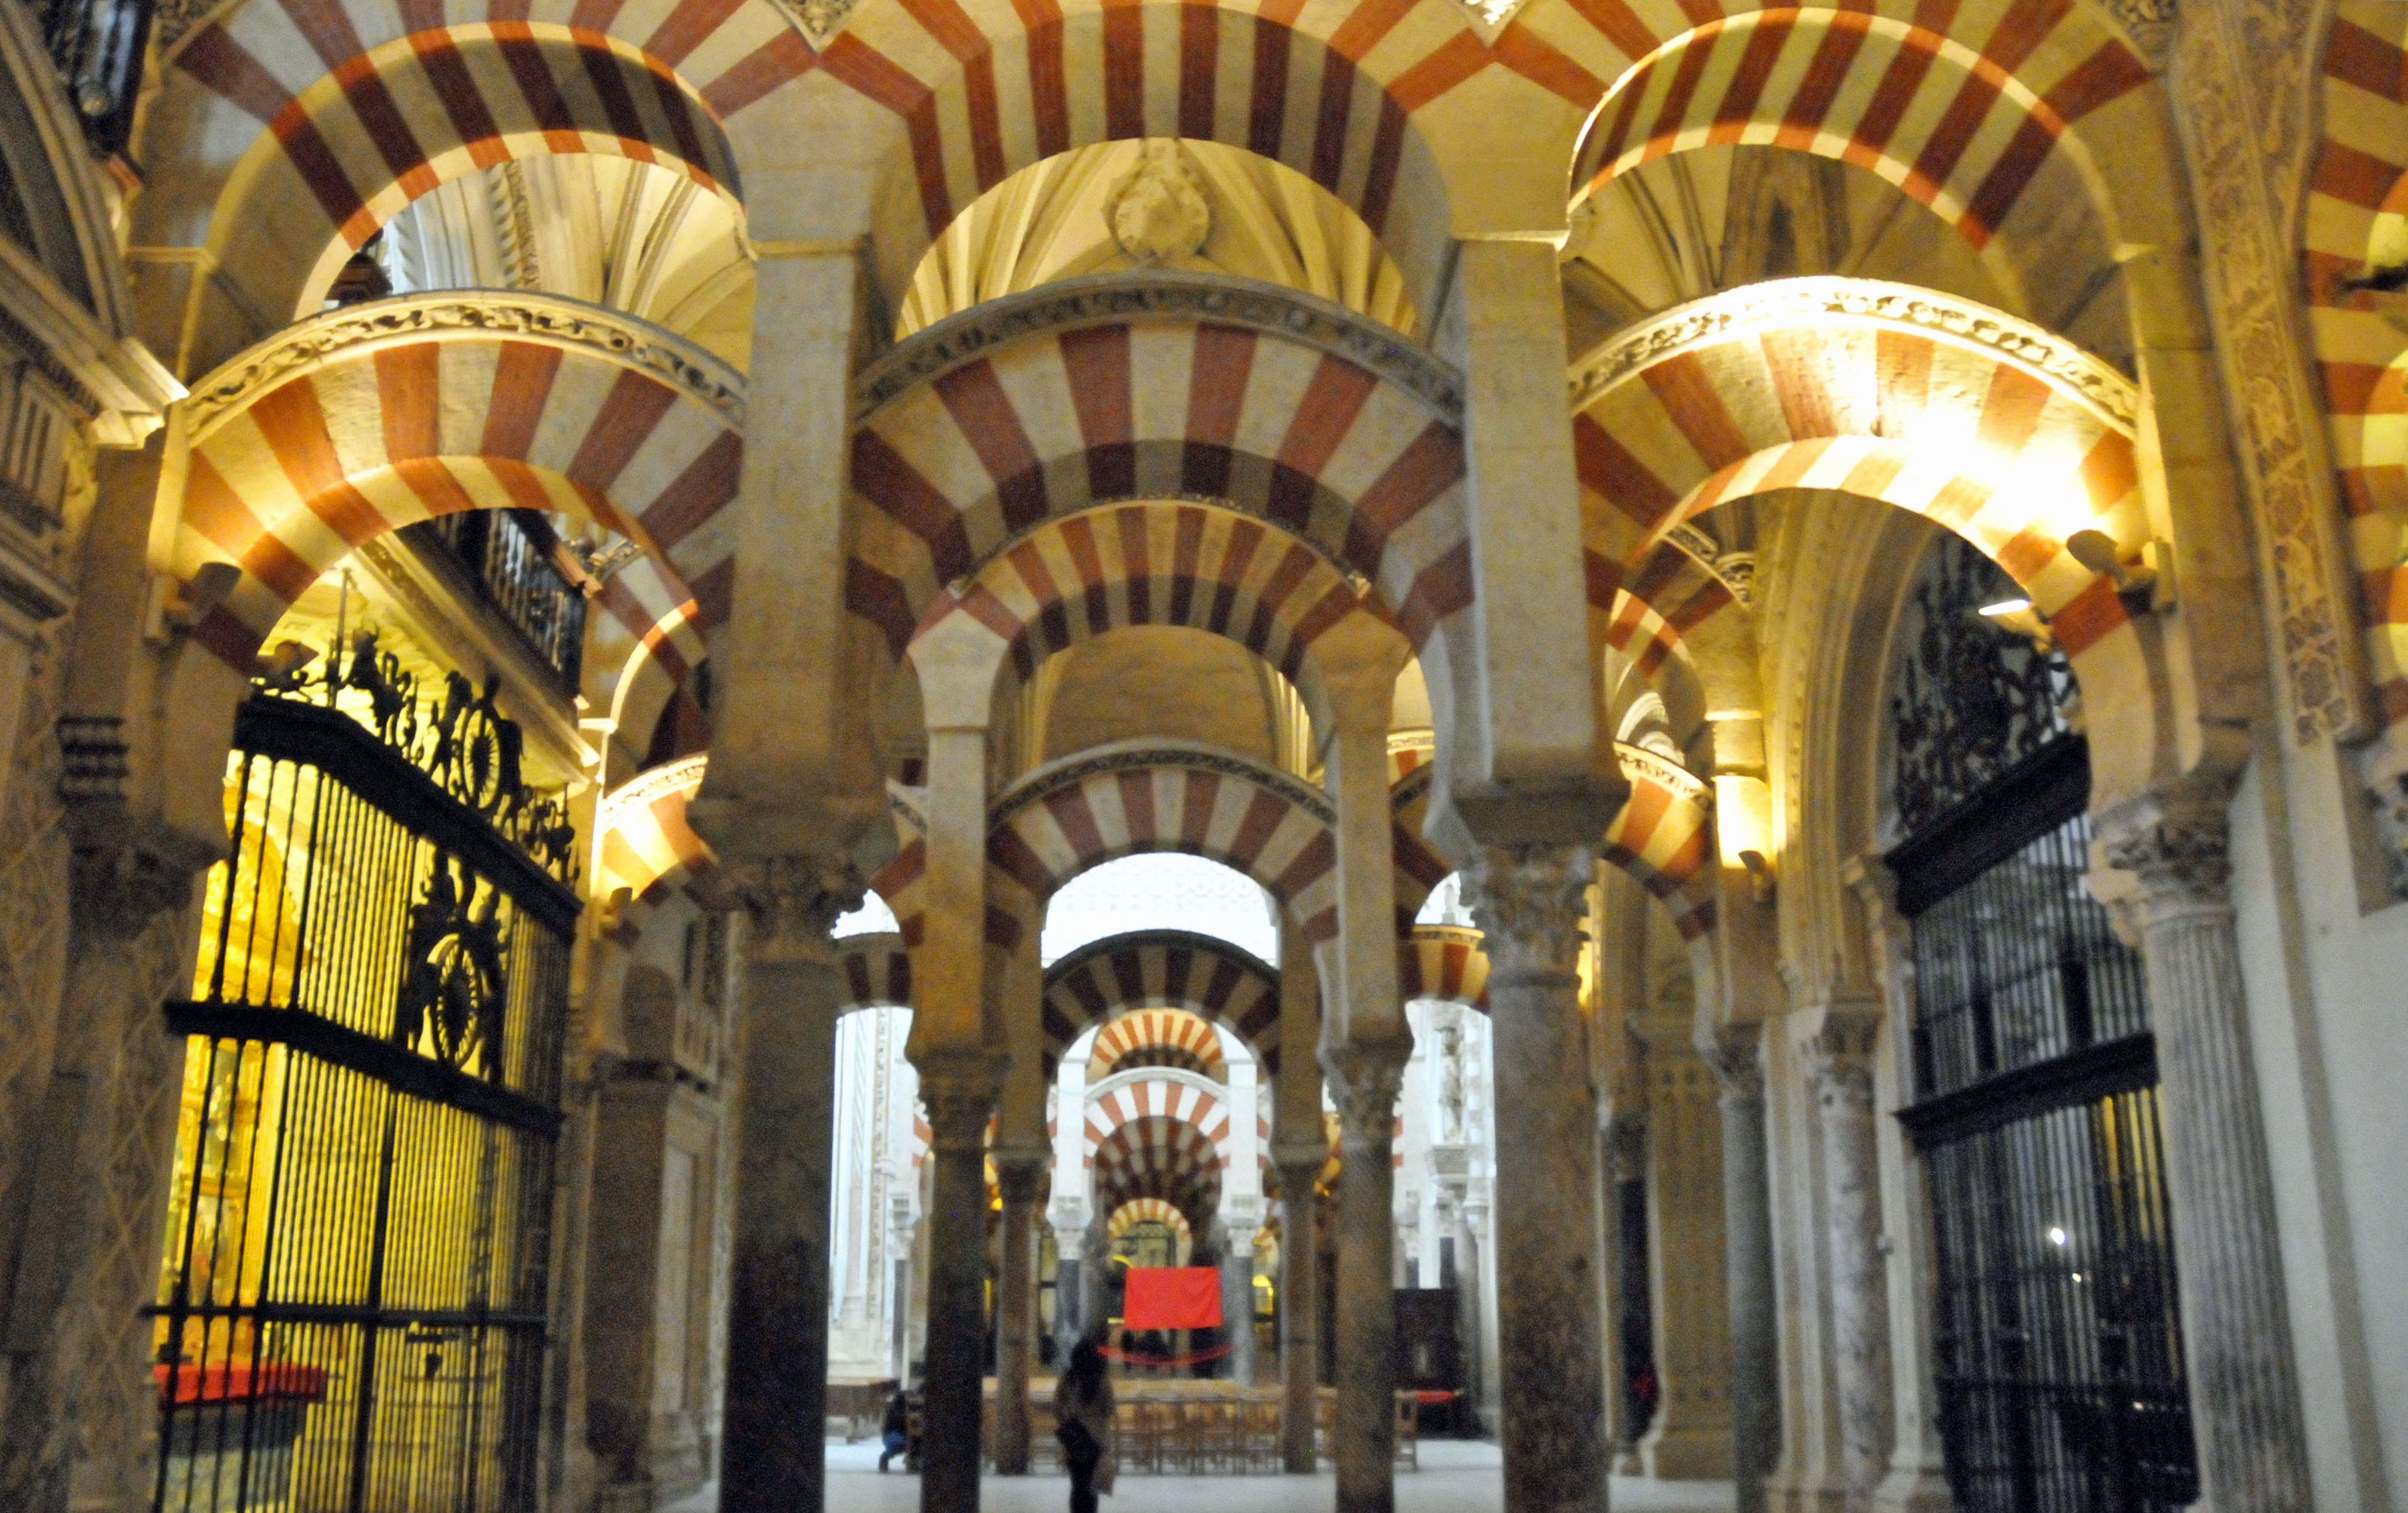 Inside the Mezquita of Cordoba (Photo by Don Knebel)